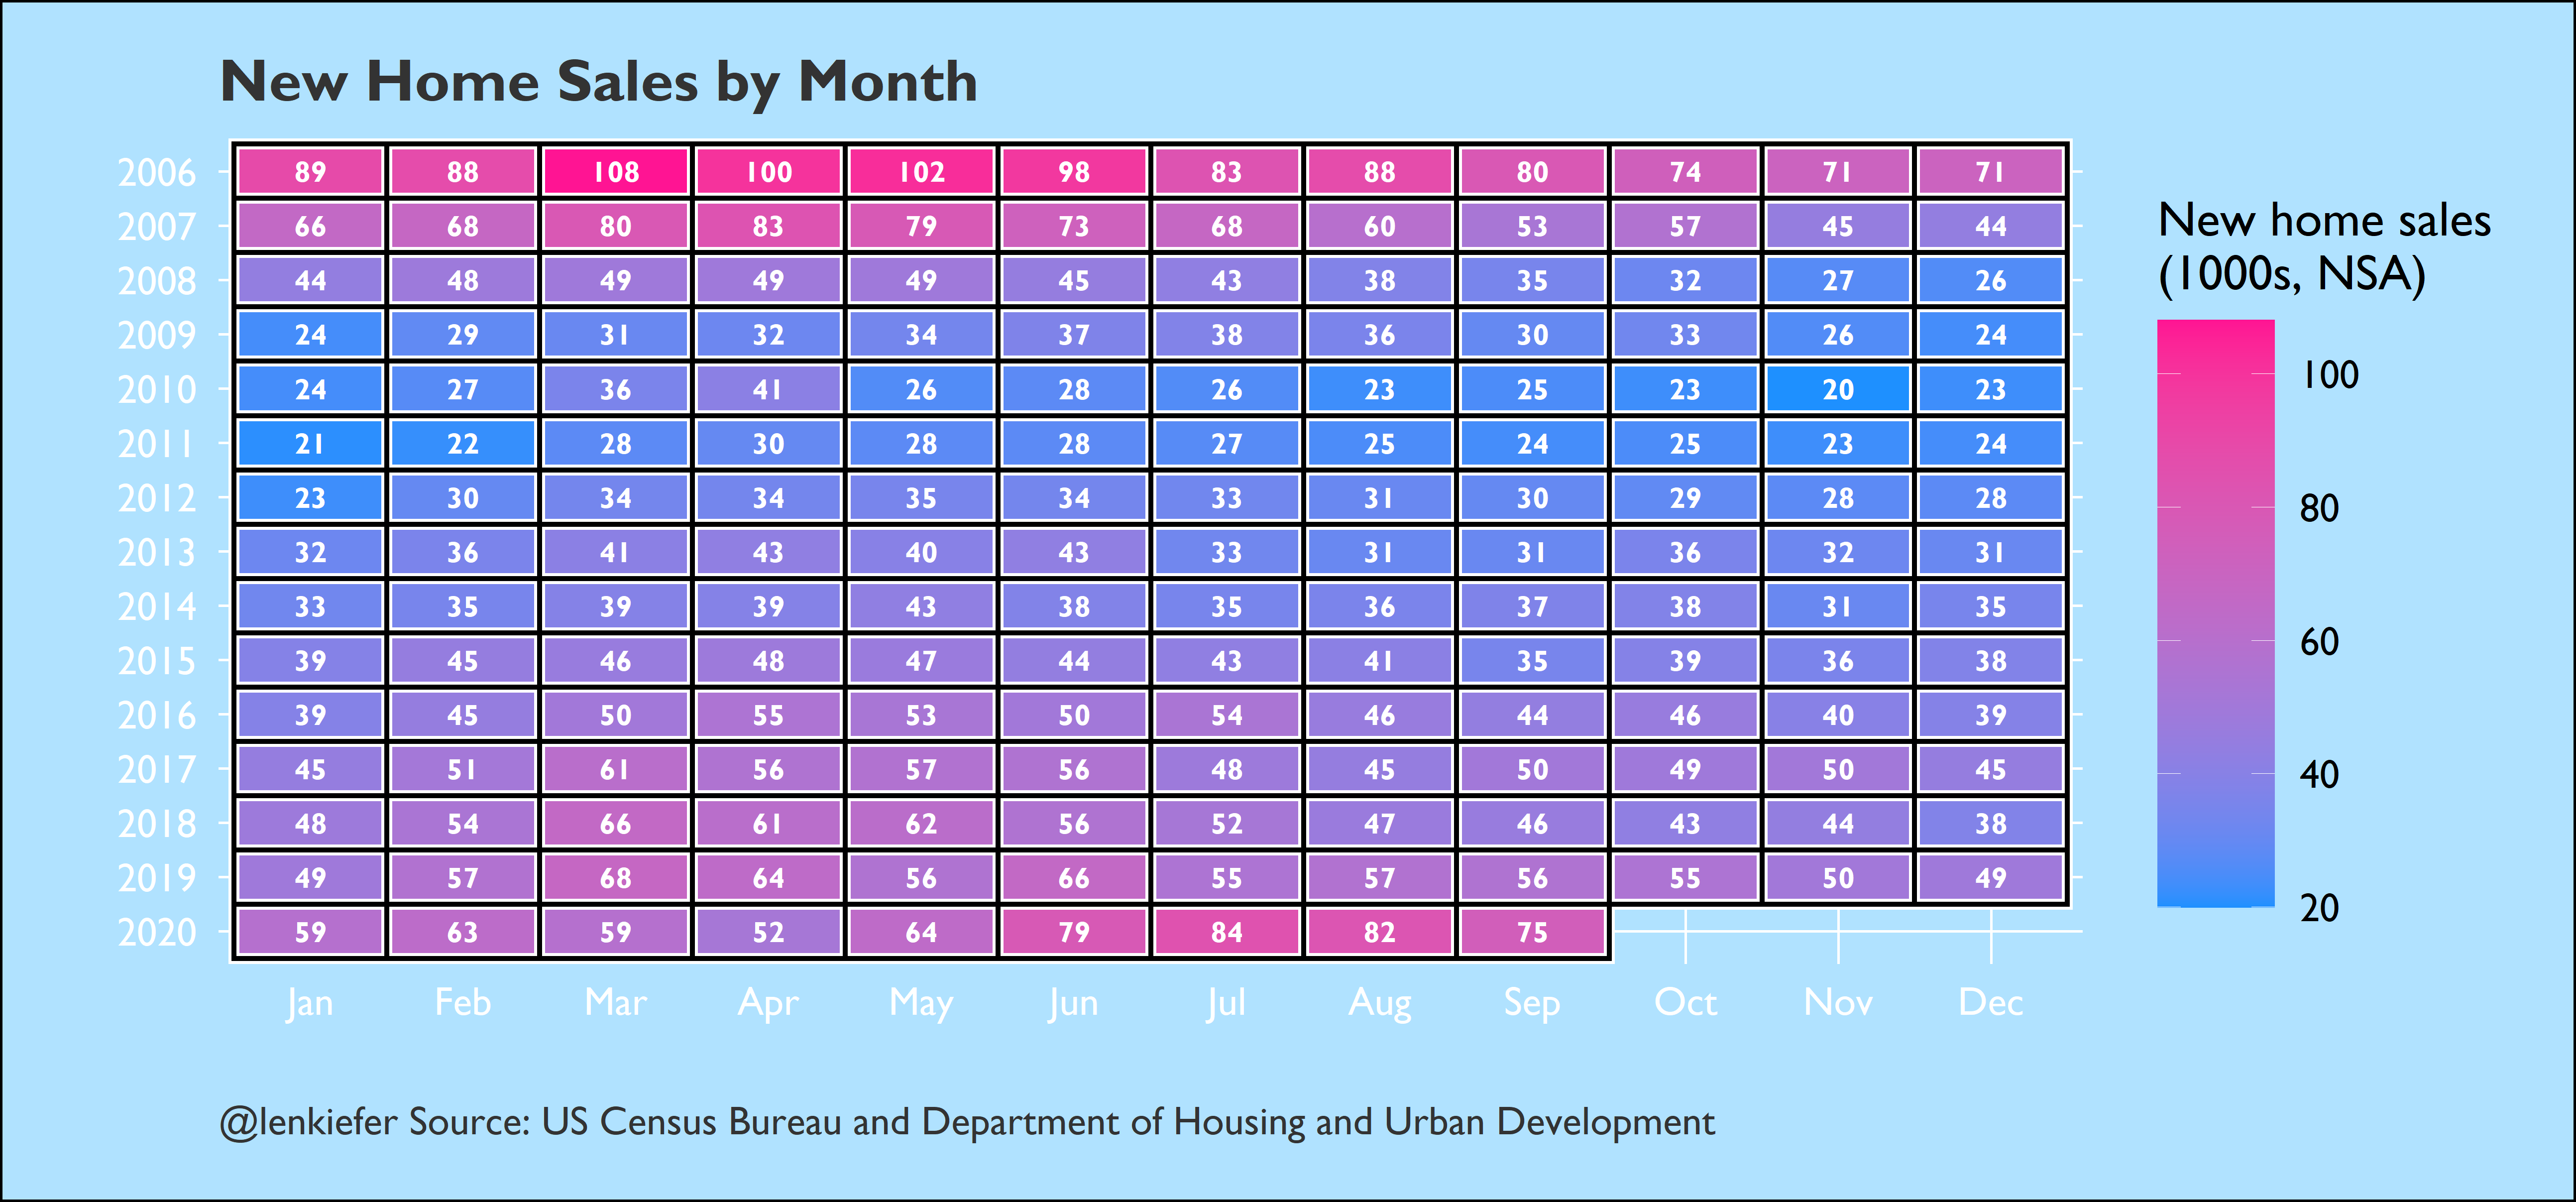 Tile plot of new home sales by month (NSA)